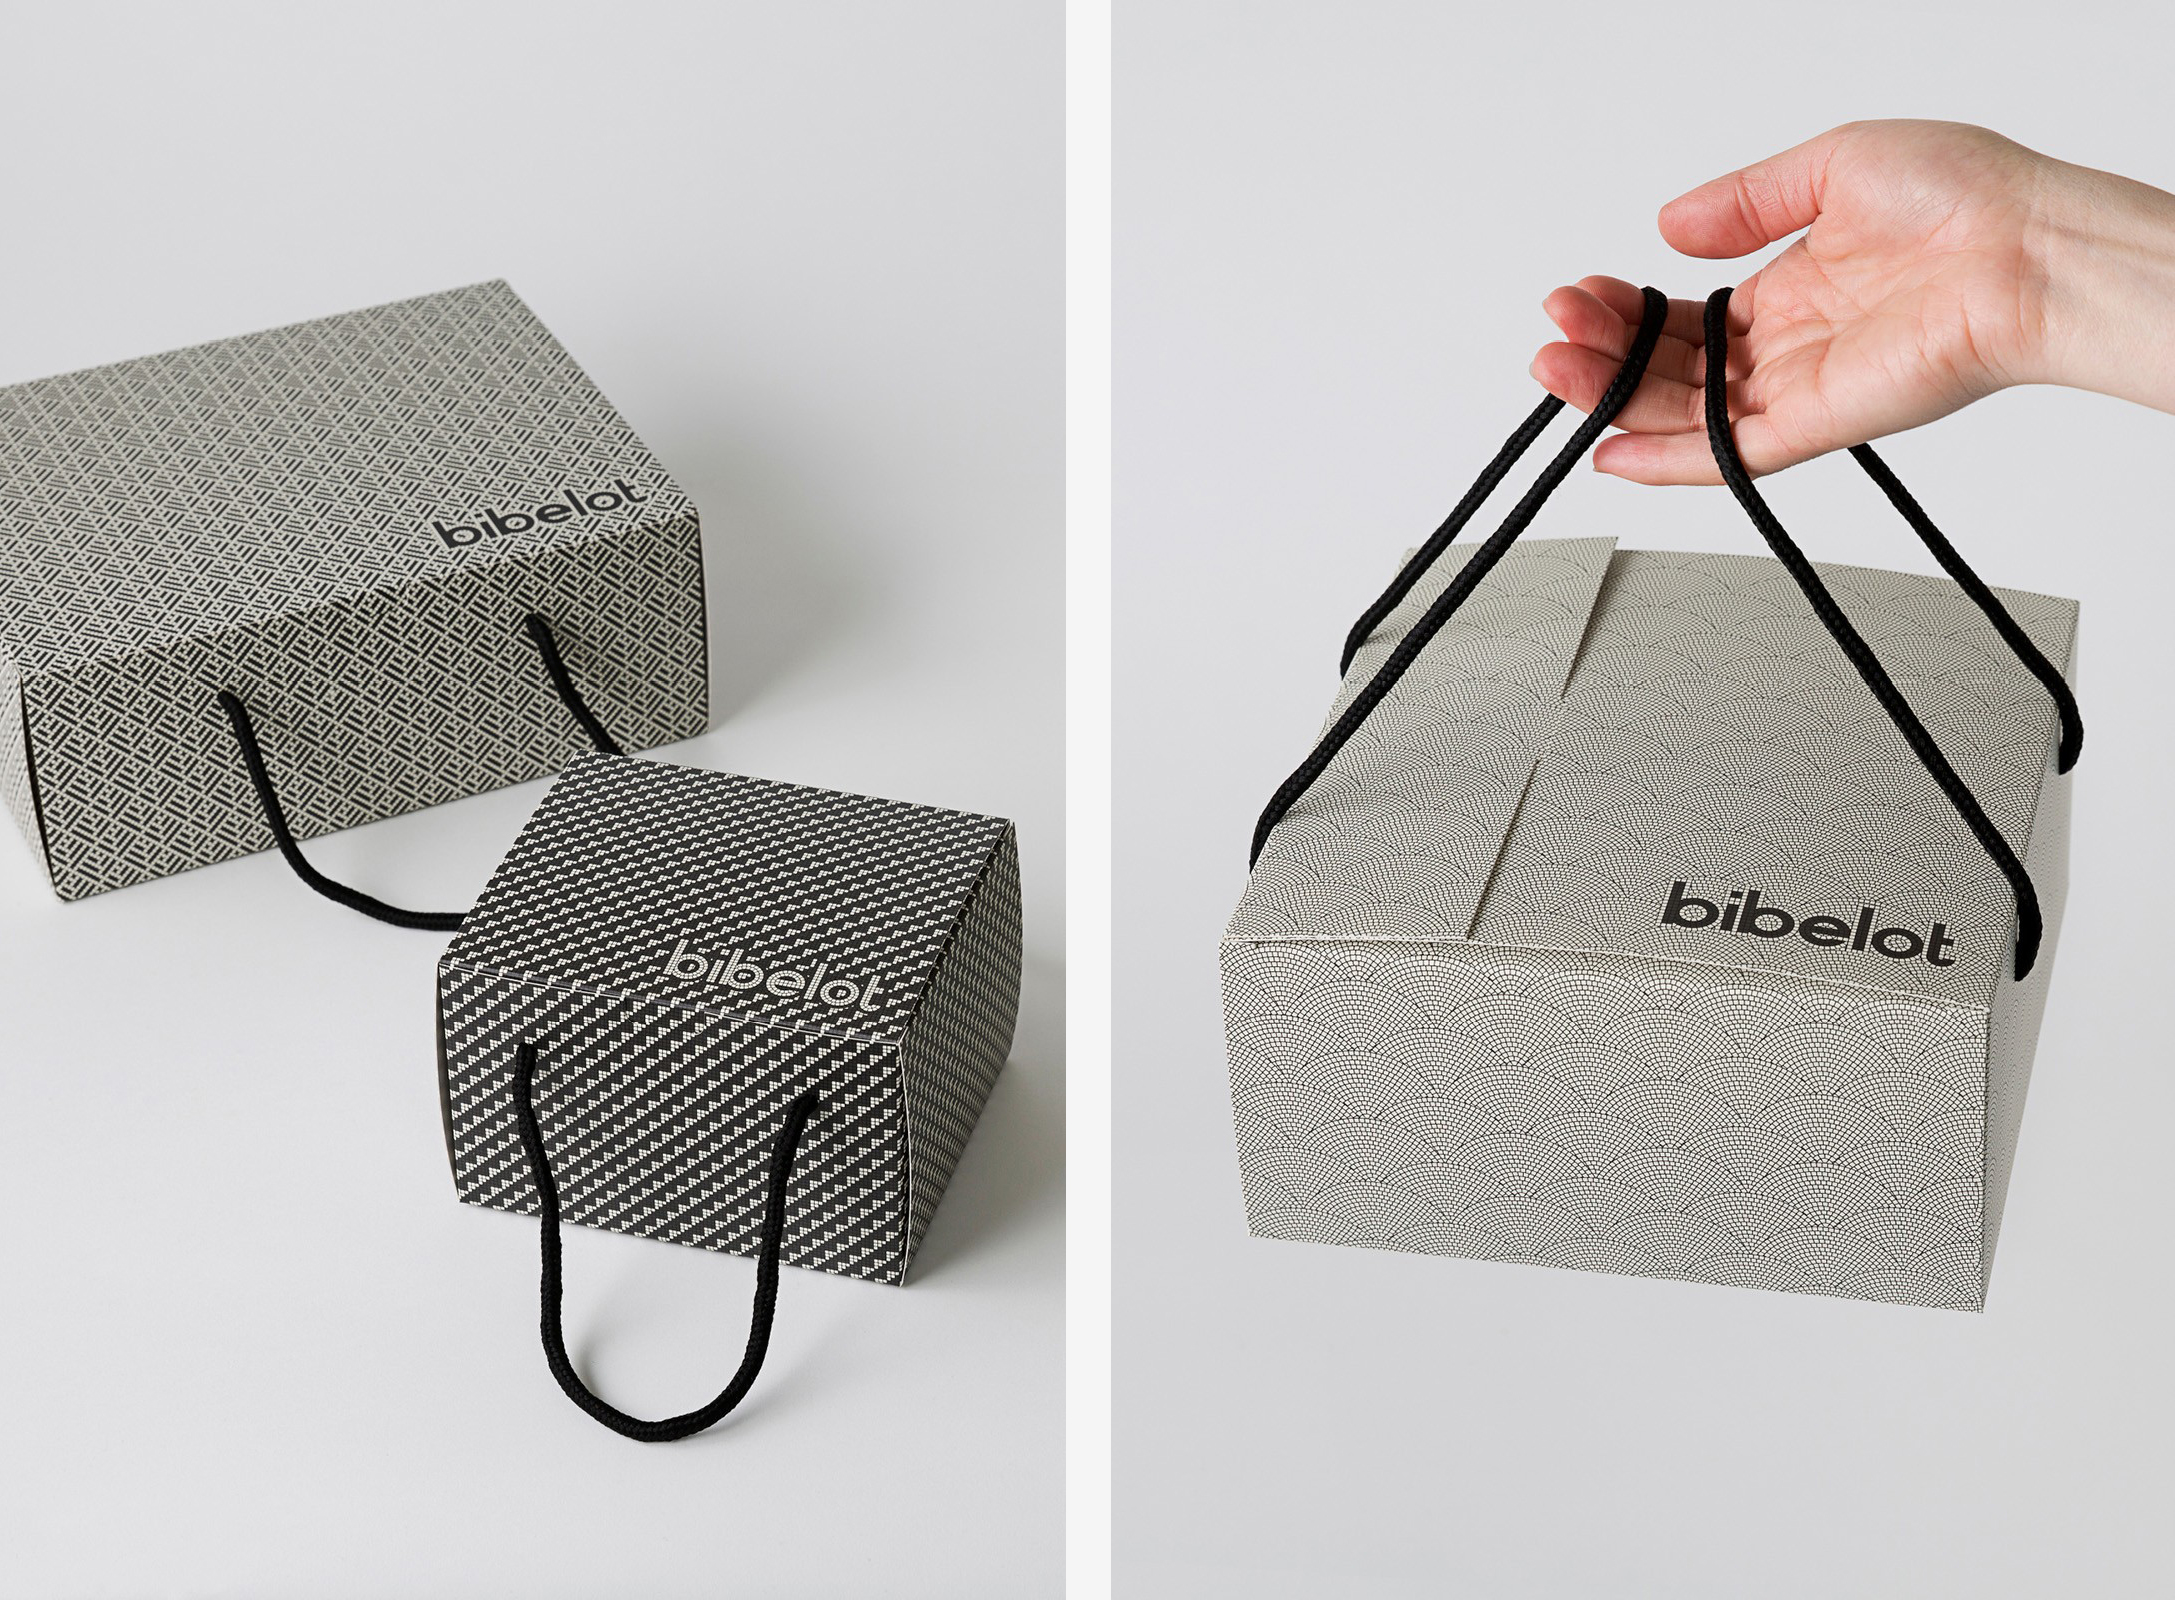 Package design and branding for Bibelot designed by A Friend Of Mine